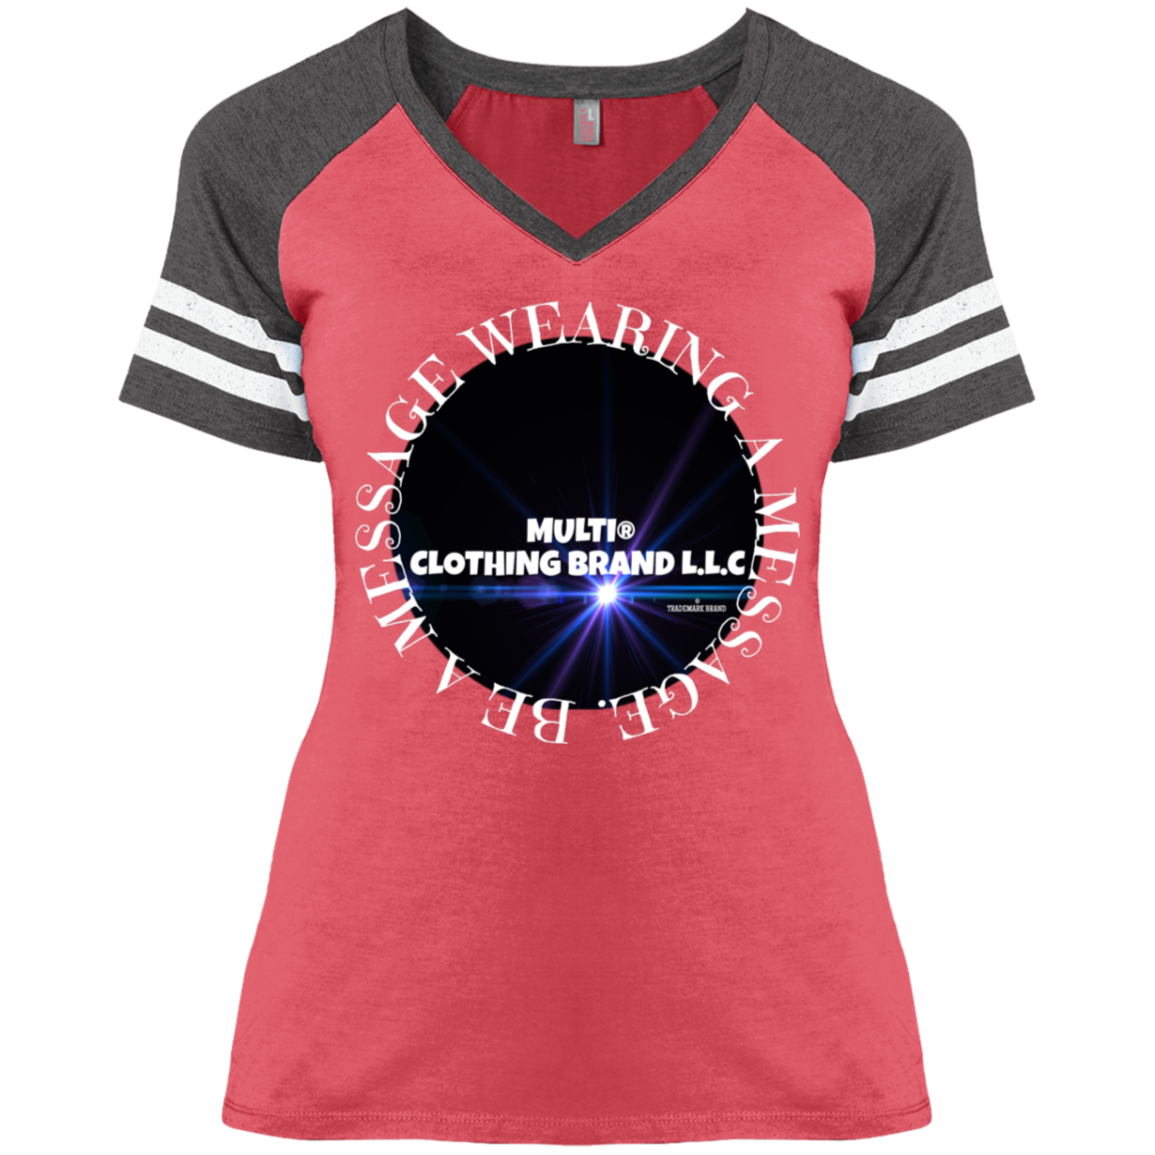 Multi Clothing Brand L.L.C - Be a Message Wearing a Message - Ladies' Game V-Neck T-Shirt CustomCat